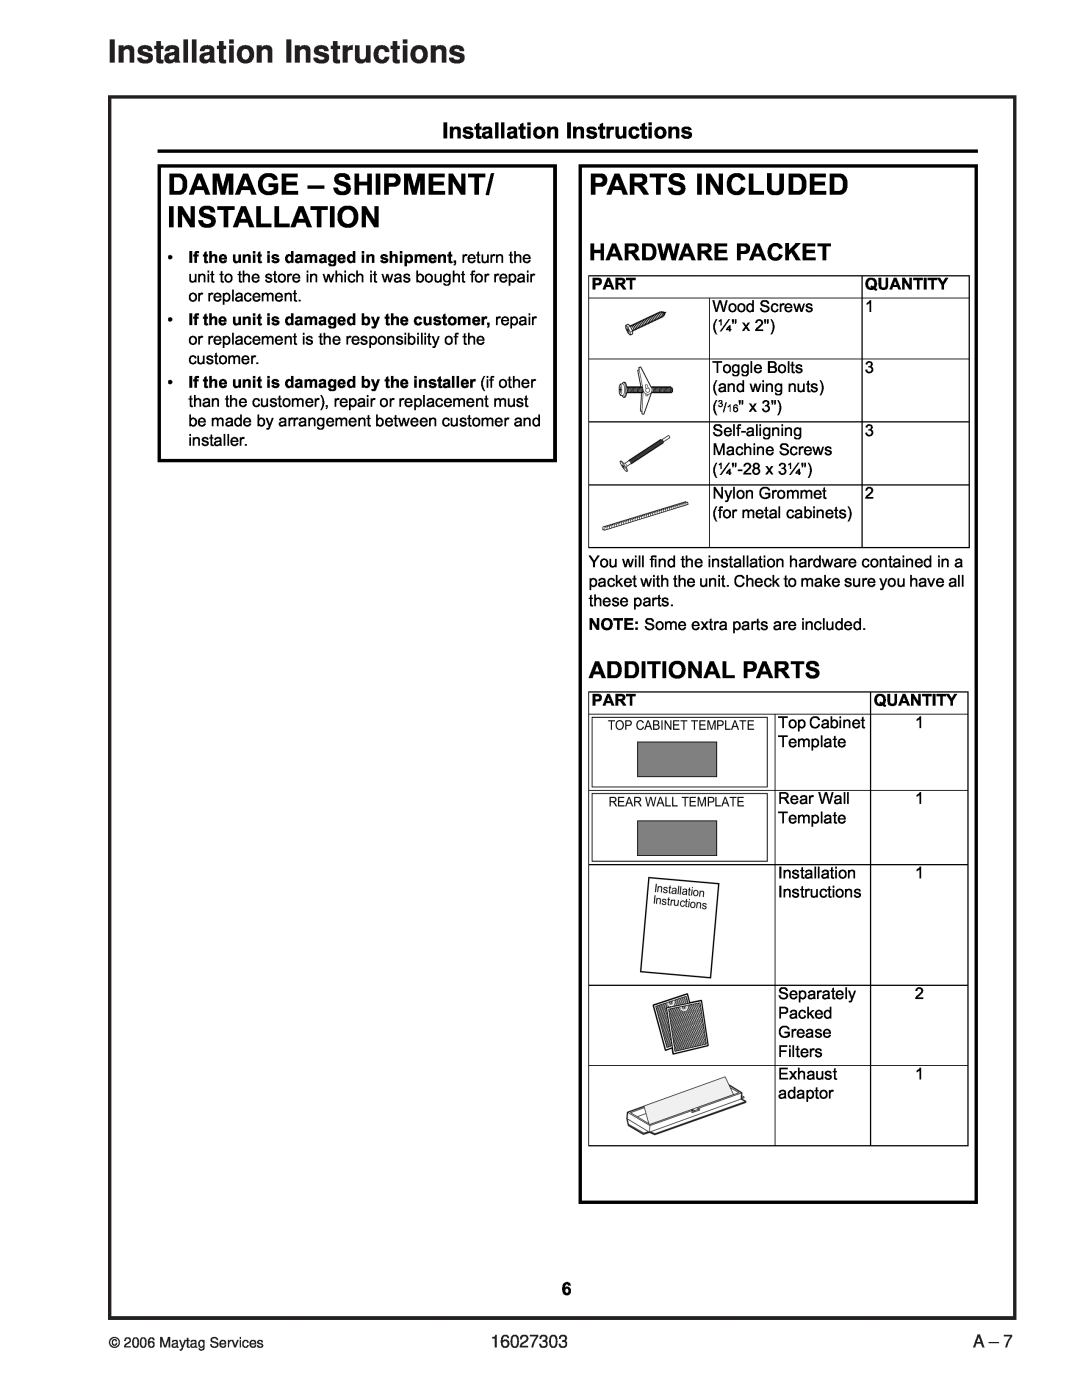 Maytag UMV1152CA manual Damage – Shipment/ Installation, Parts Included, Hardware Packet, Additional Parts 